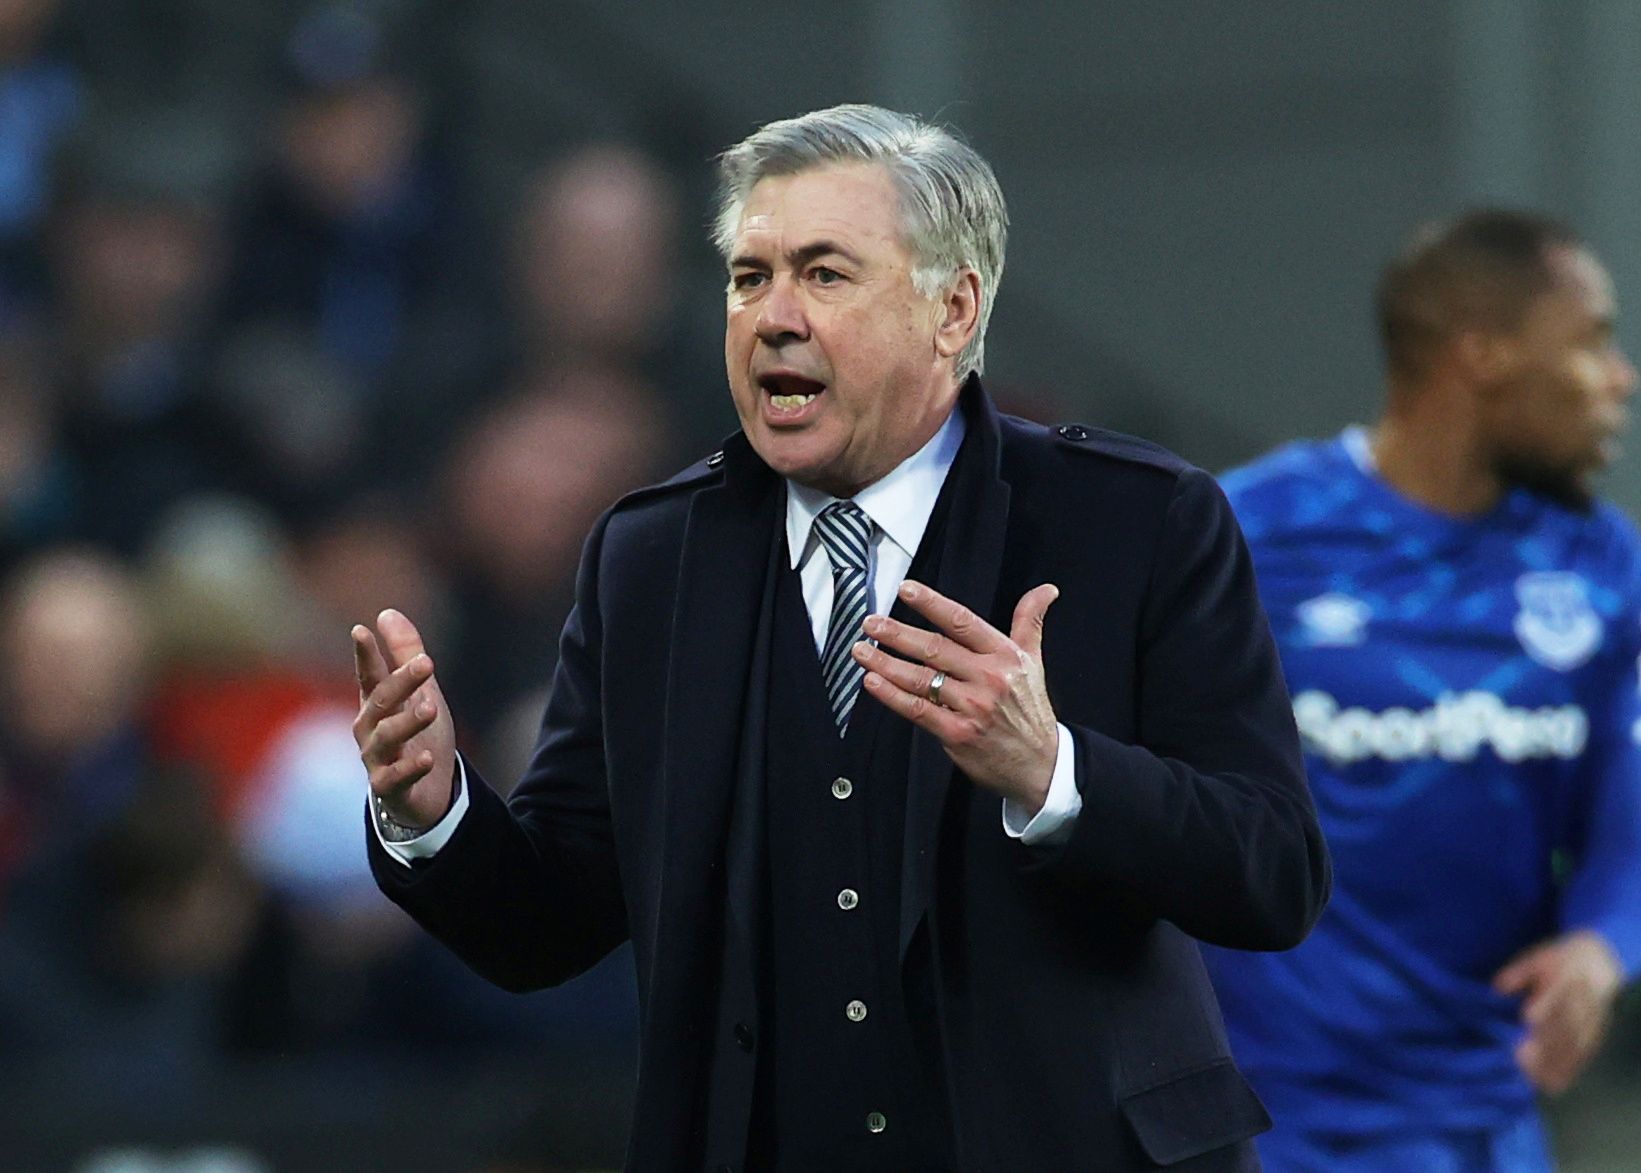 Soccer Football - Premier League - West Ham United v Everton - London Stadium, London, Britain - January 18, 2020  Everton manager Carlo Ancelotti reacts REUTERS/Eddie Keogh  EDITORIAL USE ONLY. No use with unauthorized audio, video, data, fixture lists, club/league logos or "live" services. Online in-match use limited to 75 images, no video emulation. No use in betting, games or single club/league/player publications.  Please contact your account representative for further details.